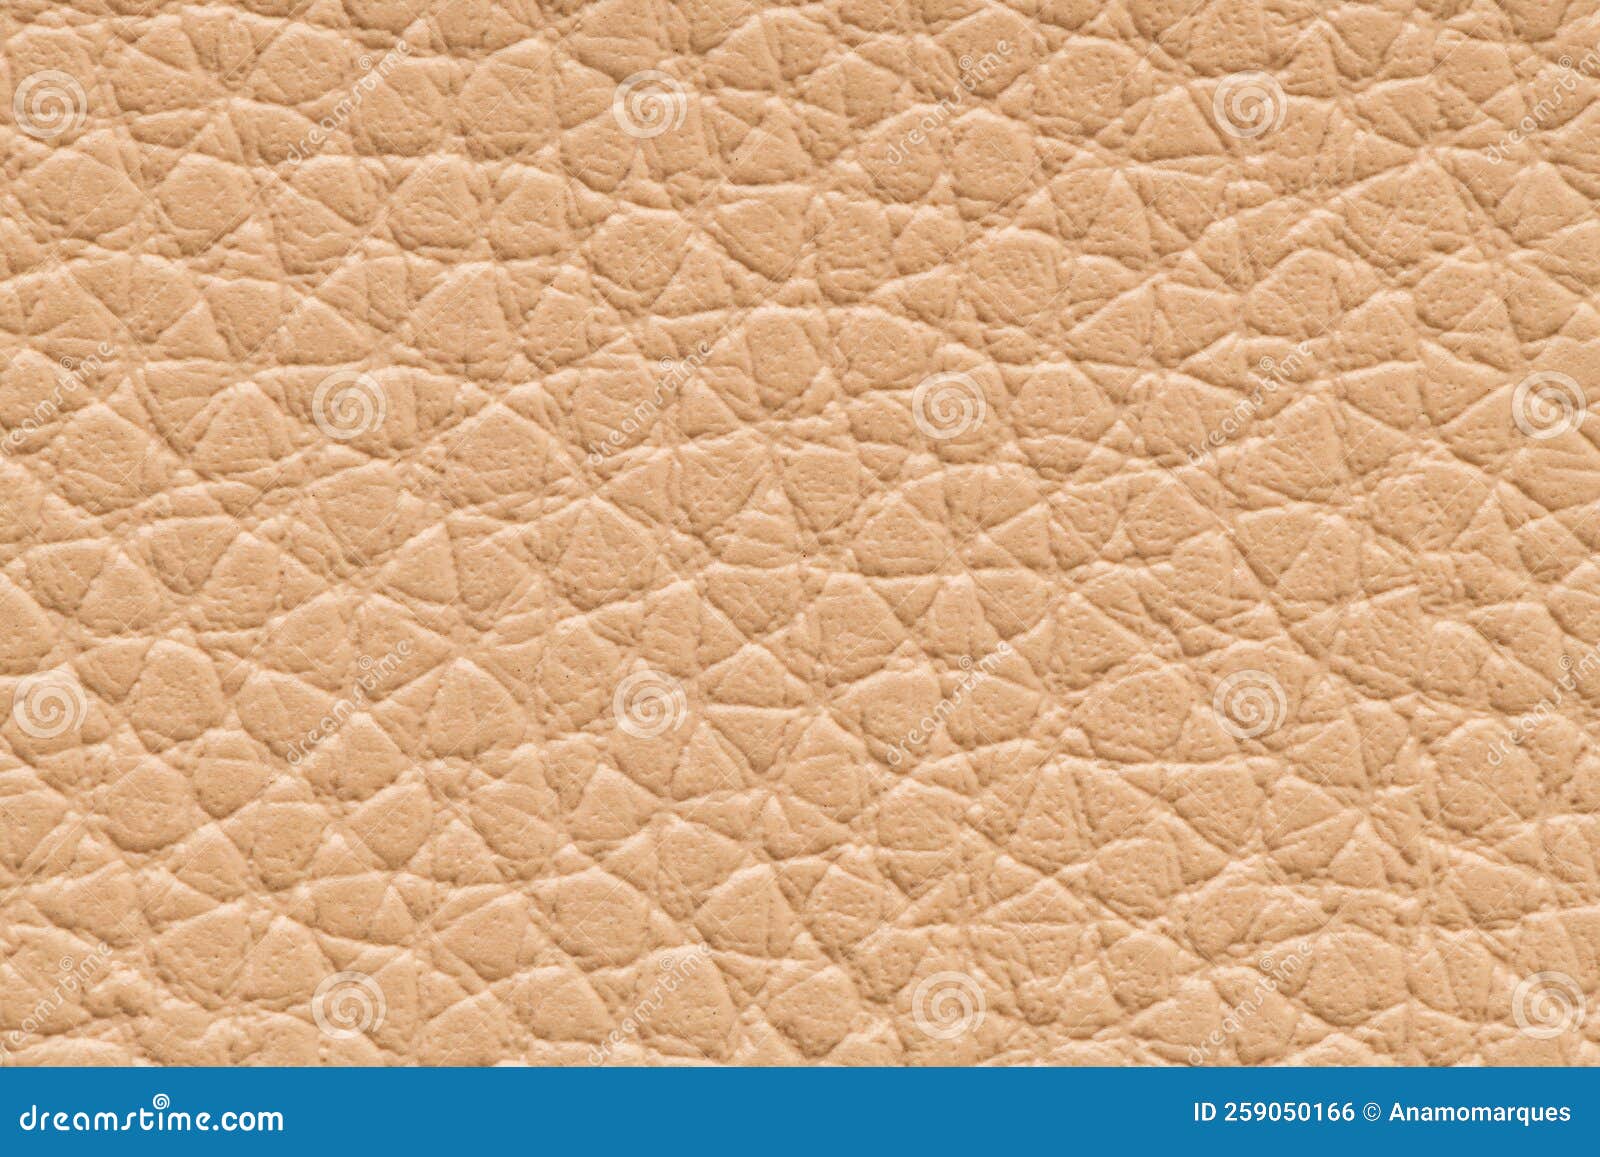 Suede leather. Genuine leather material. Brown background. Beige  background. Skin testure. Suede. Stock Photo